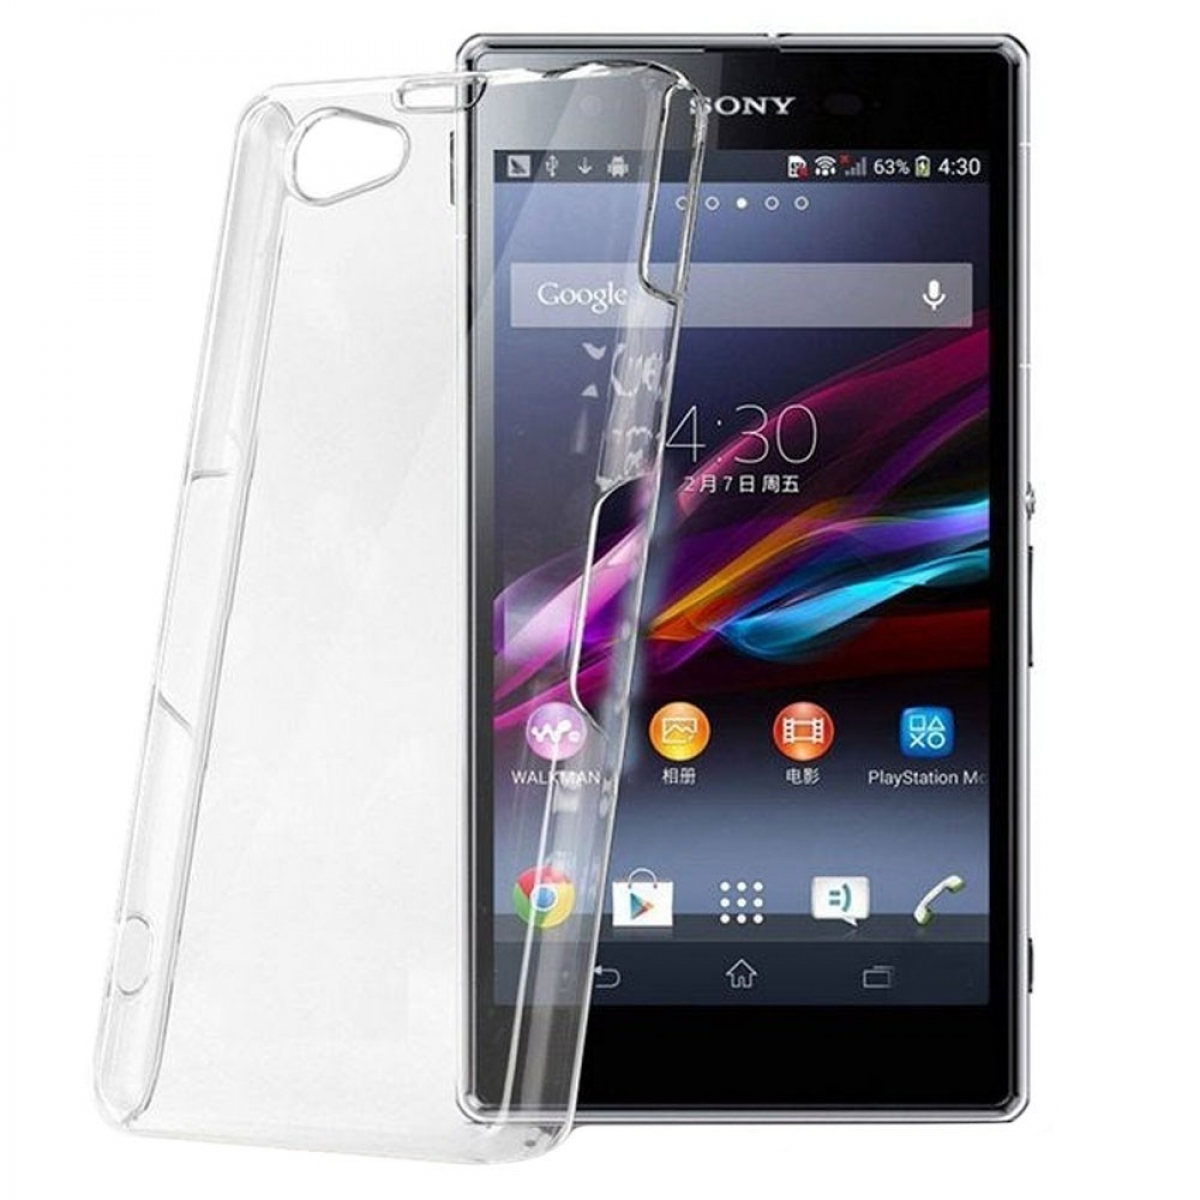 Z2 Backcover, CA4, Xperia Compact, Sony, Transparent CASEONLINE